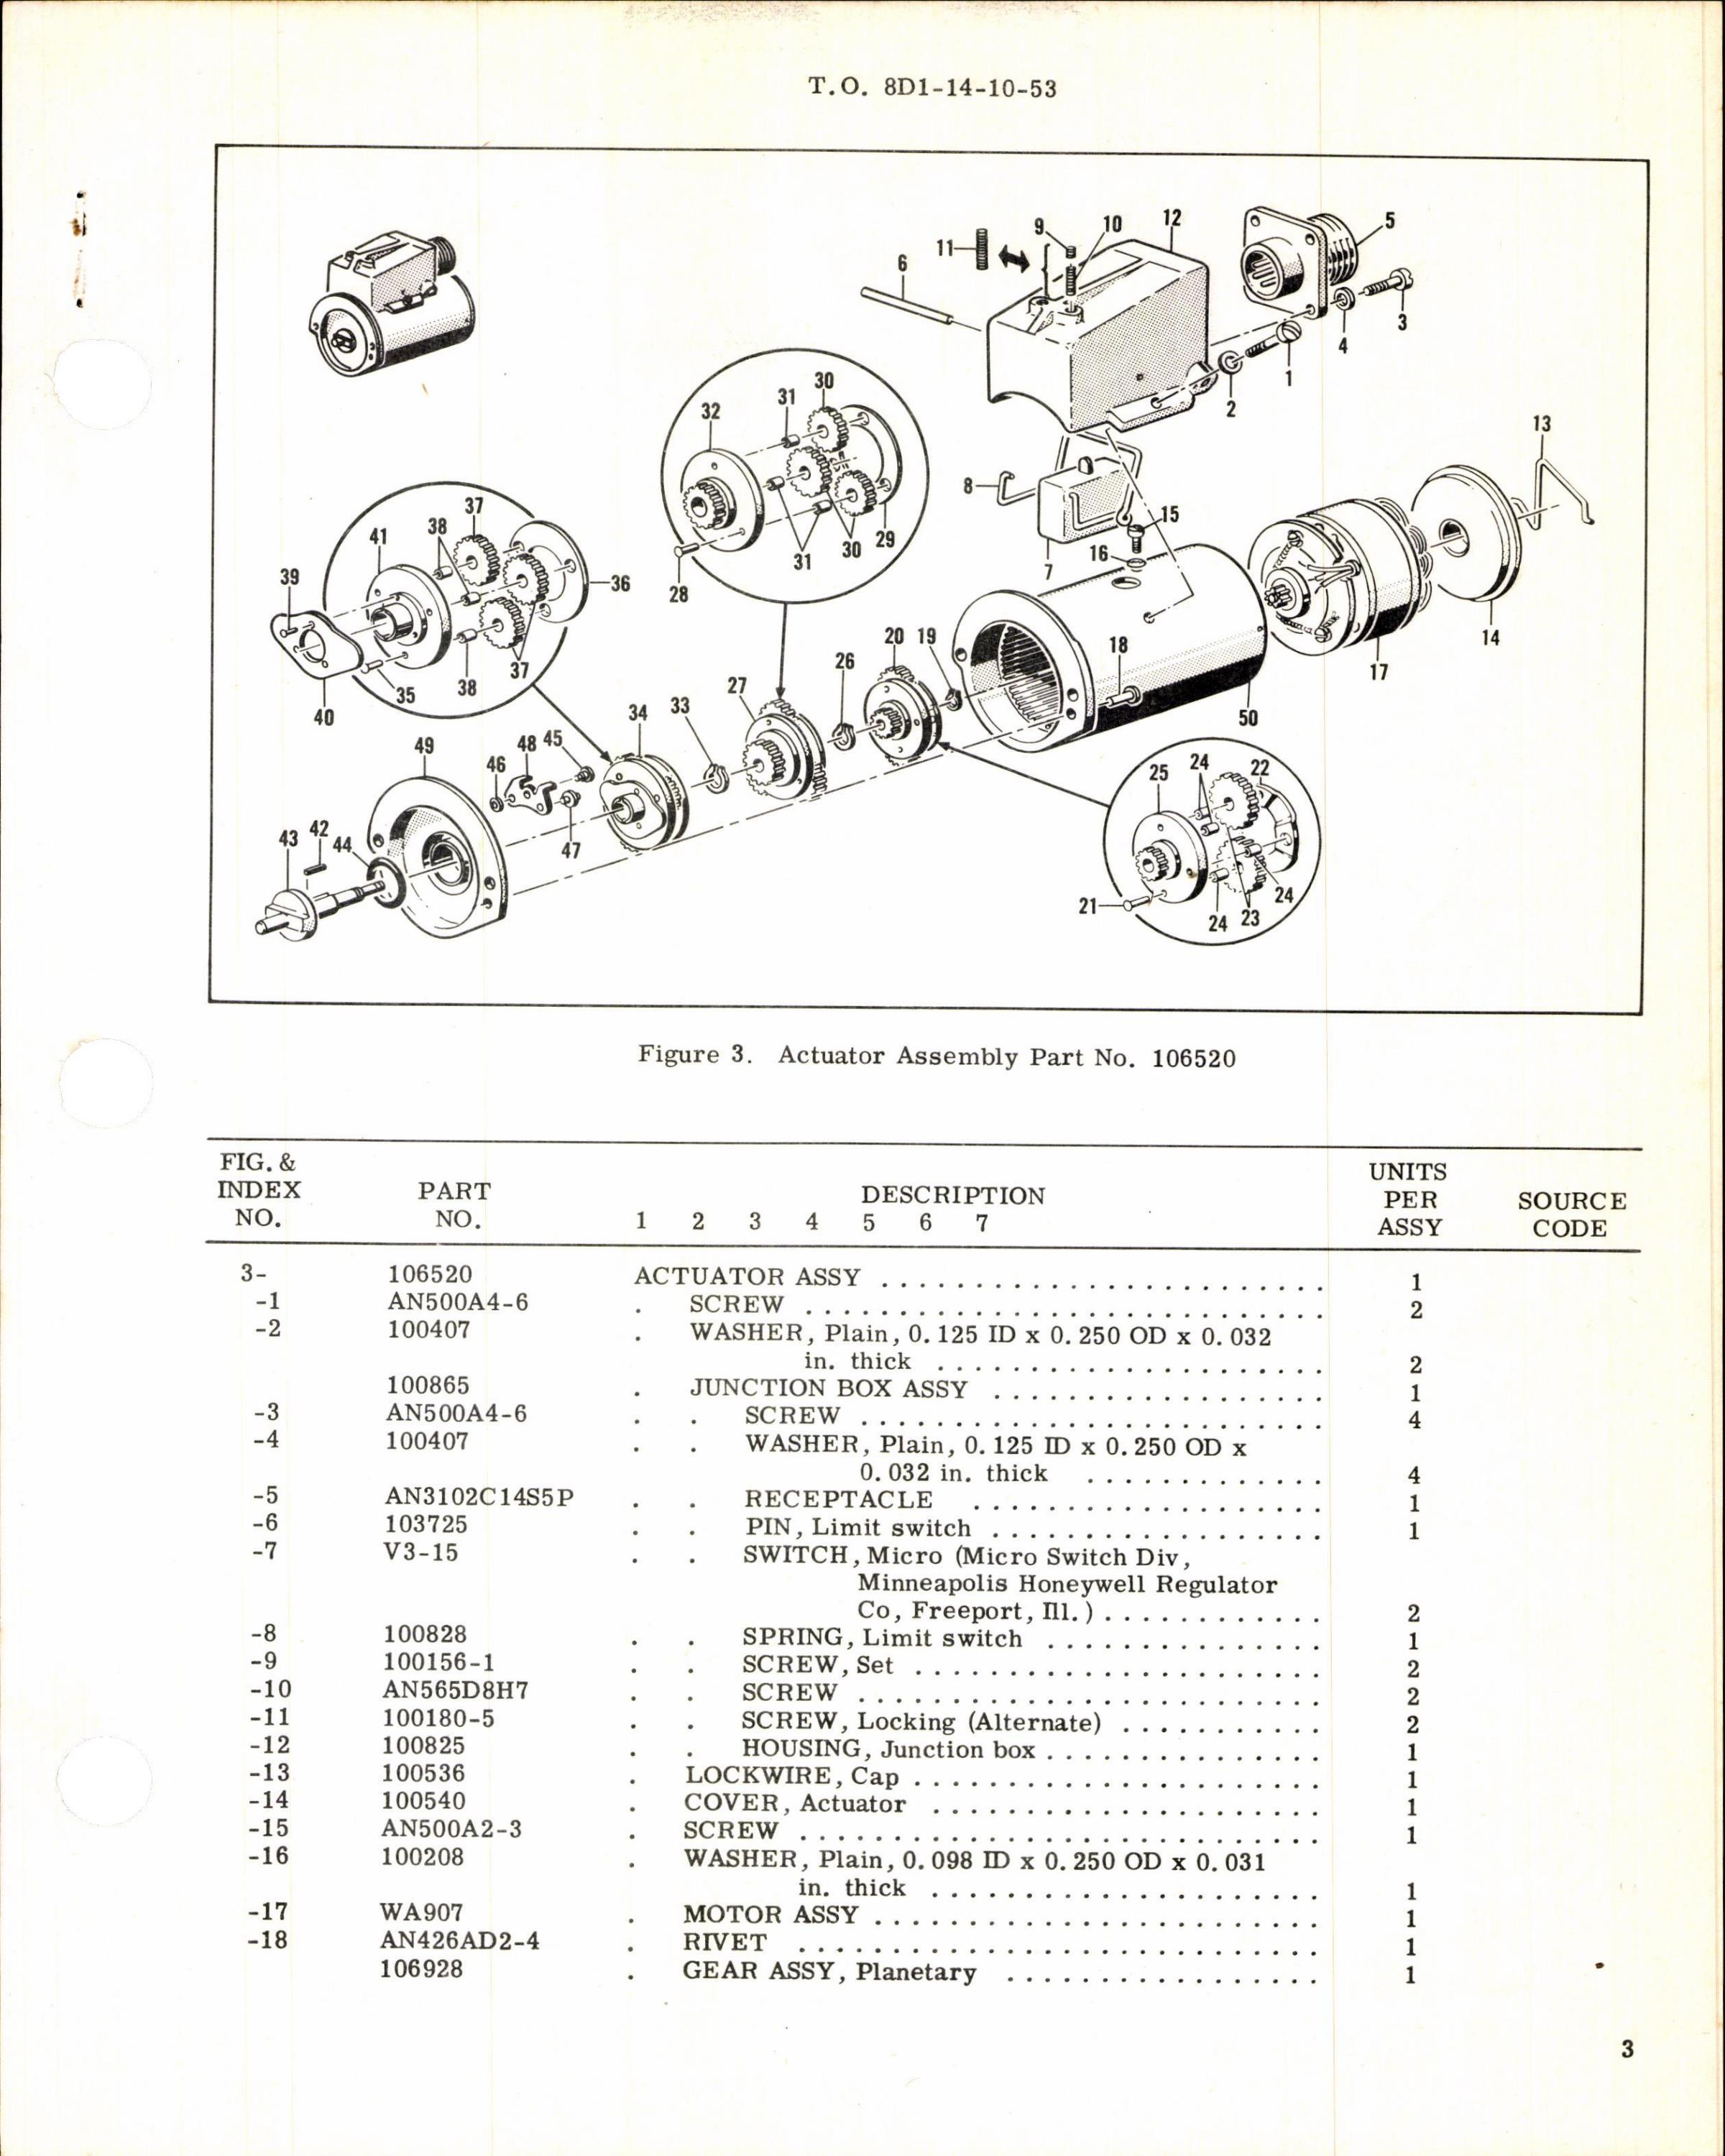 Sample page 3 from AirCorps Library document: Instructions w Parts Breakdown for Actuator Assembly Part 106520